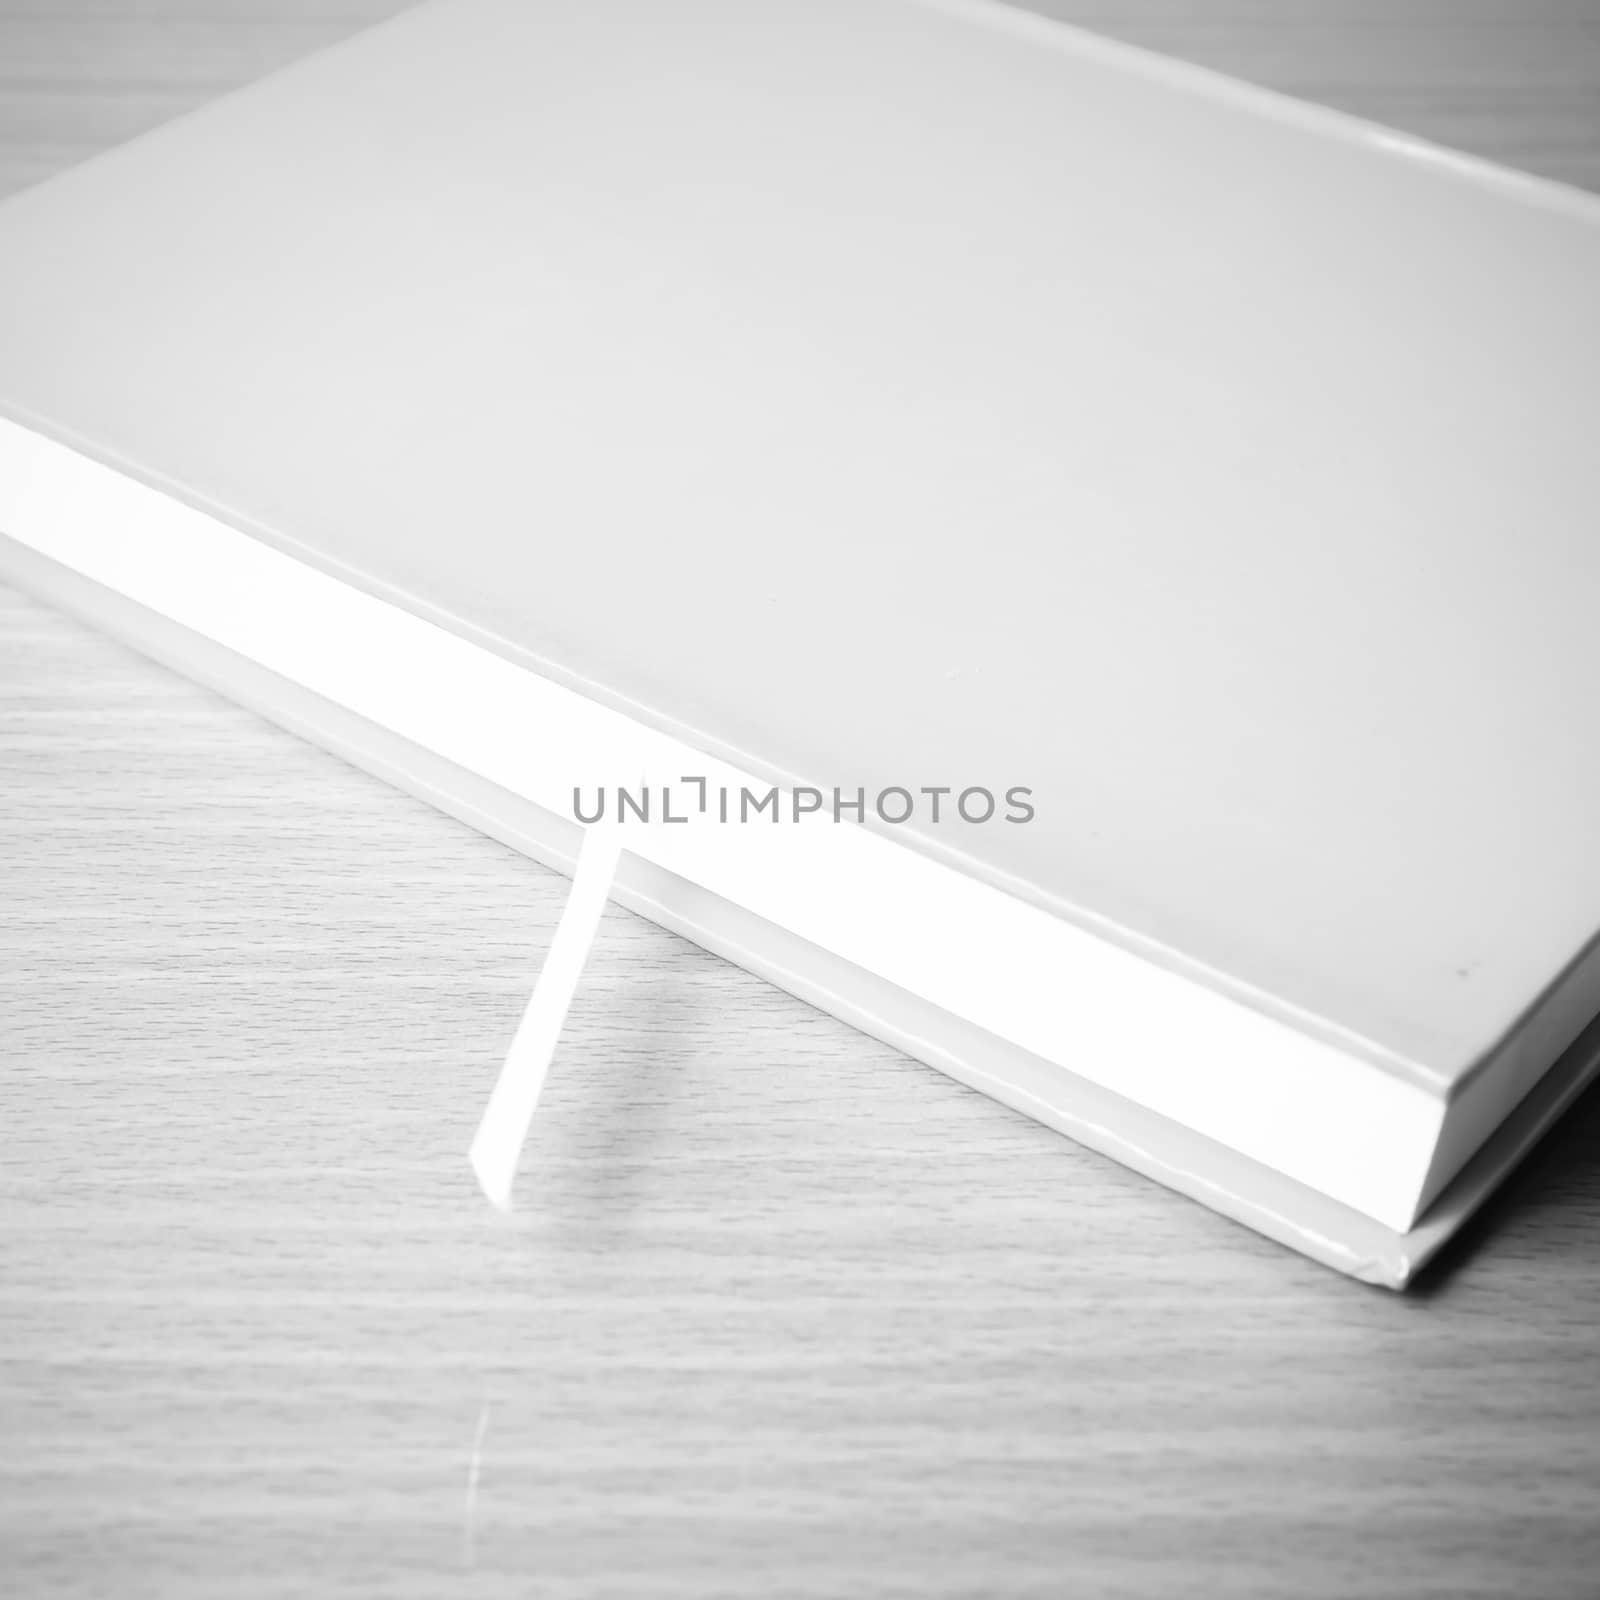 book on wood table background black and white color tone style